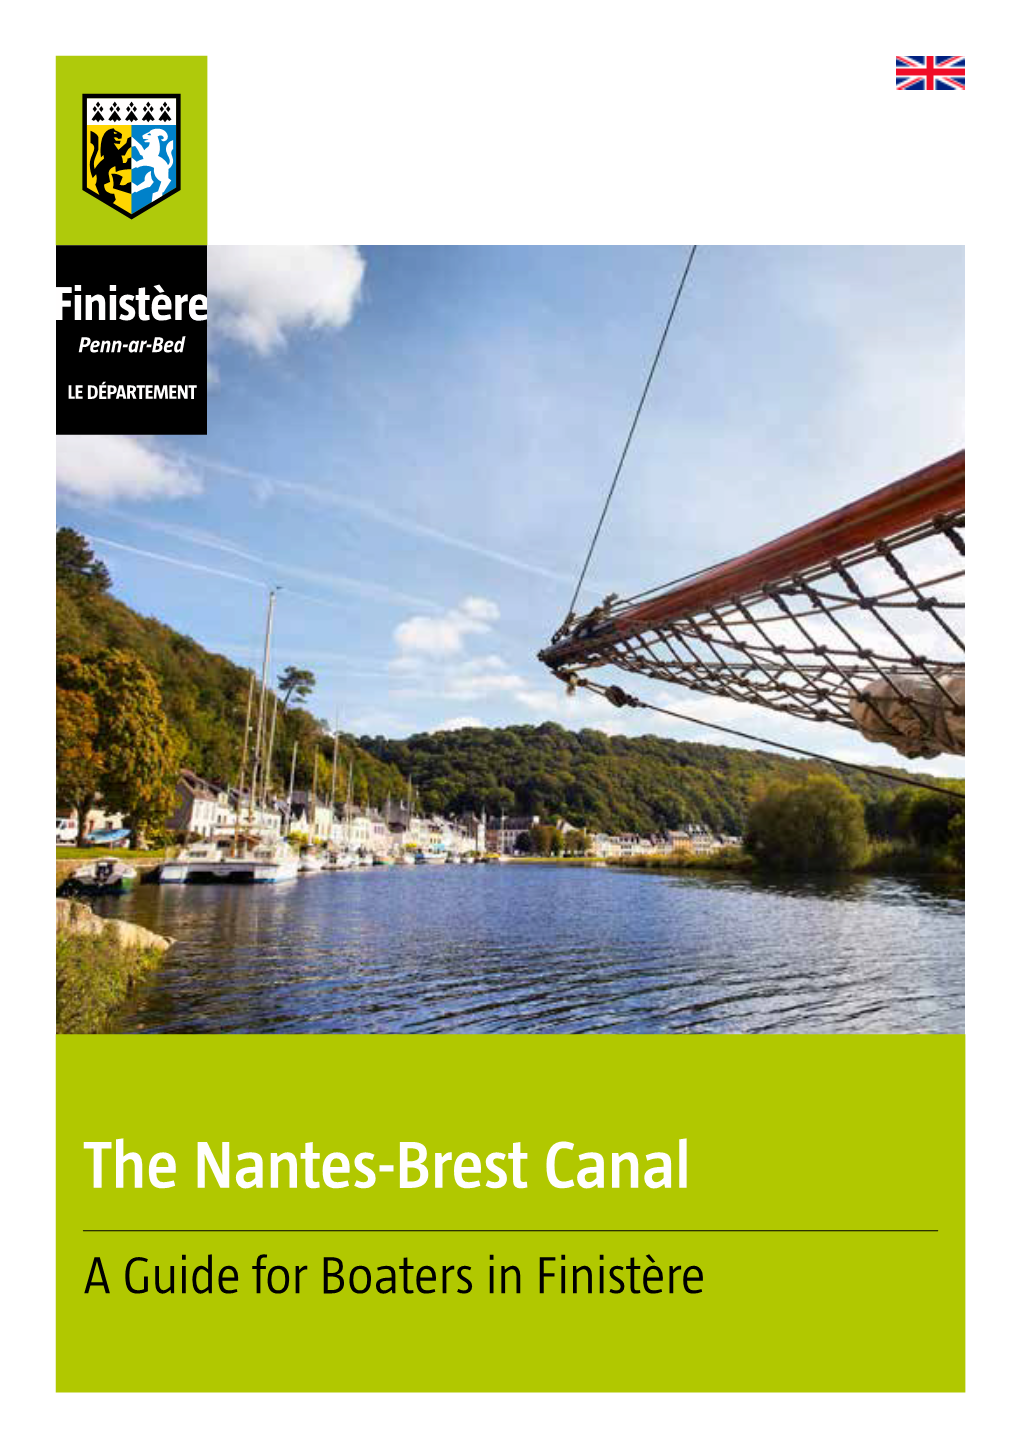 The Nantes-Brest Canal